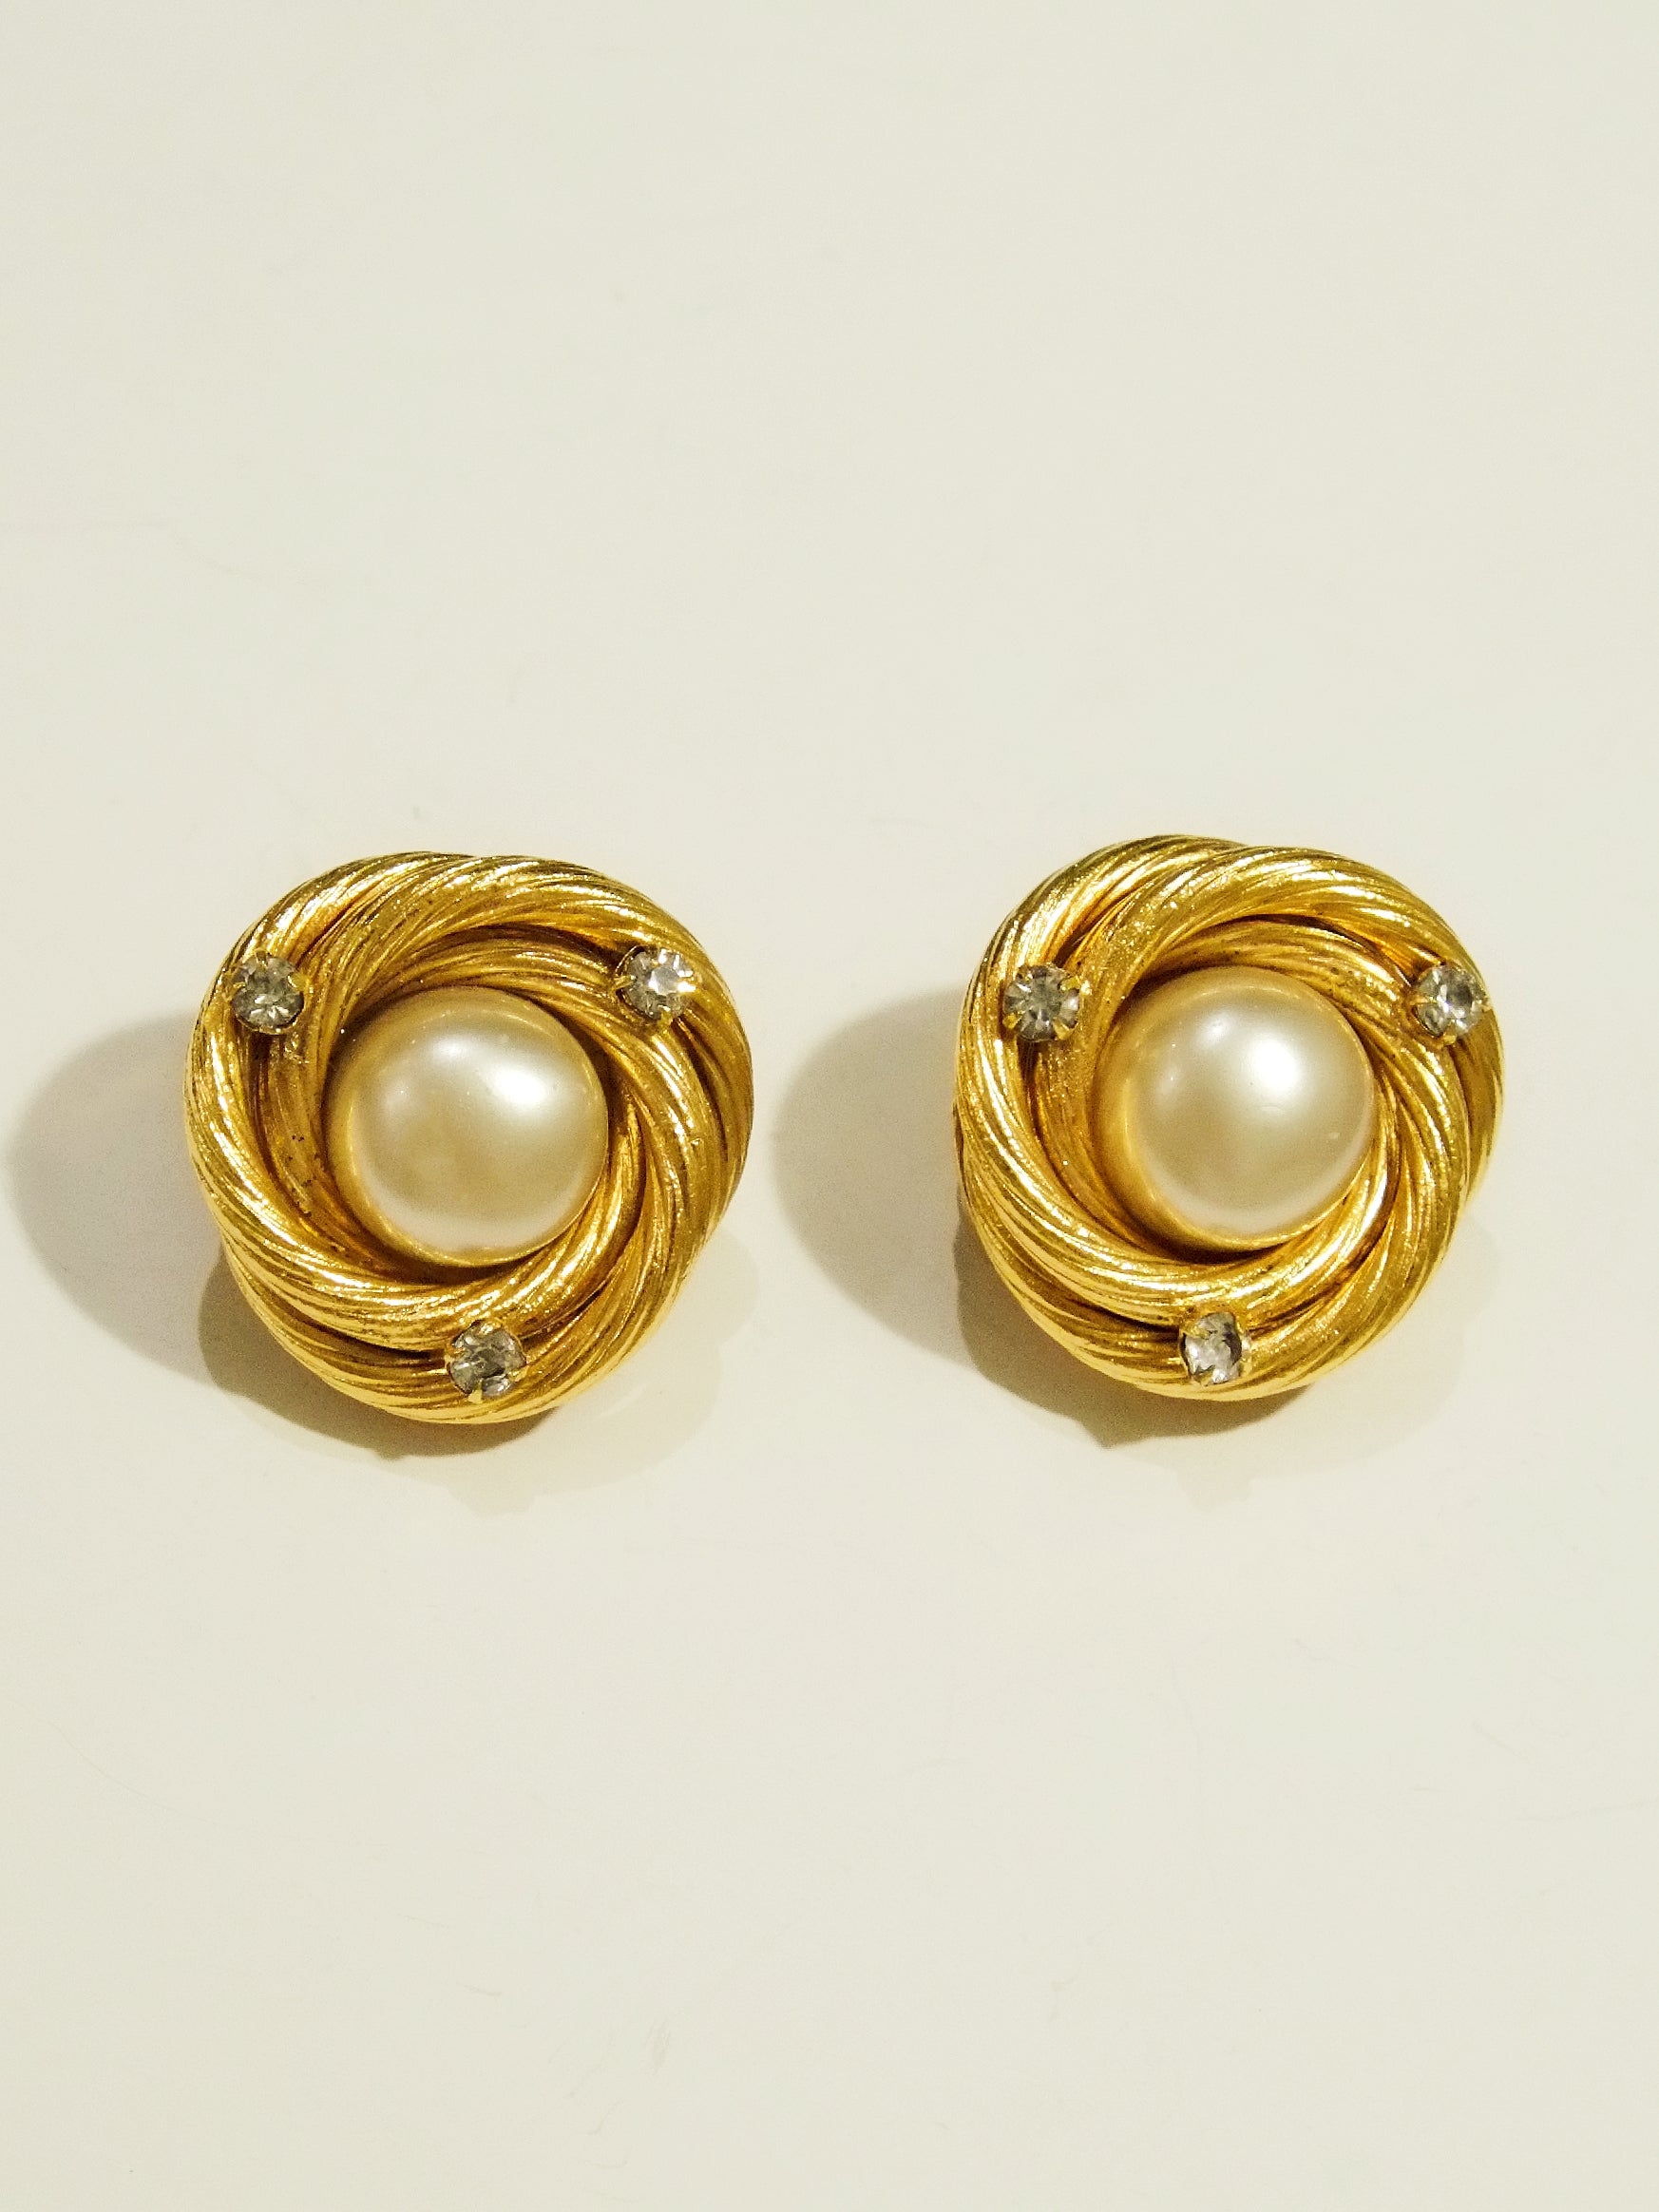 Chanel Vintage Earrings With Golden Cc, Faux Pearl, Black Leather And Chain  Frame - 2 Pieces